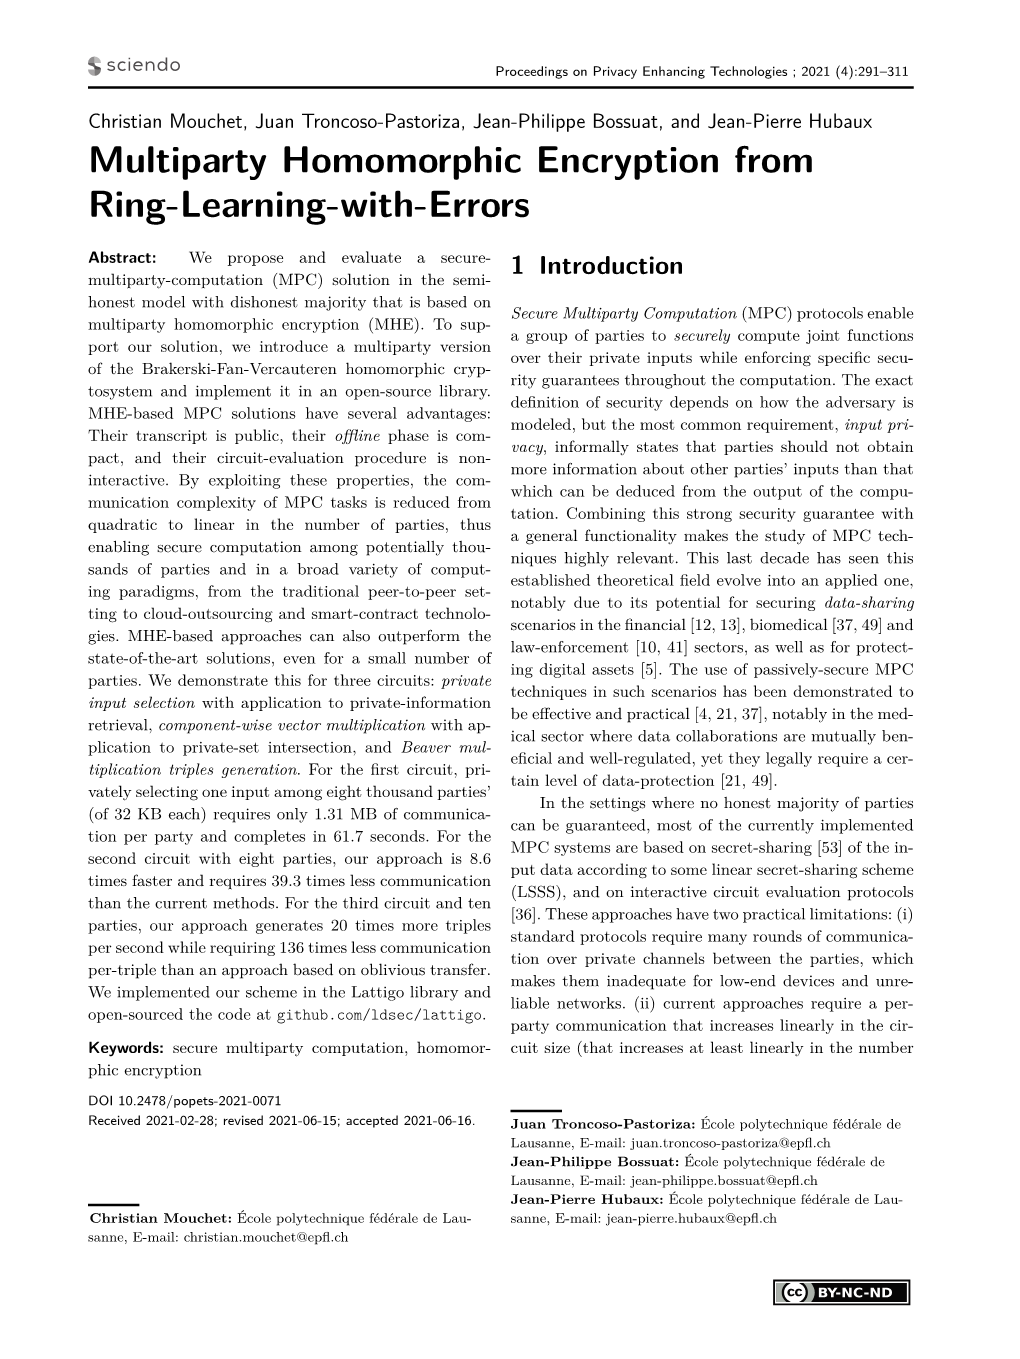 Multiparty Homomorphic Encryption from Ring-Learning-With-Errors